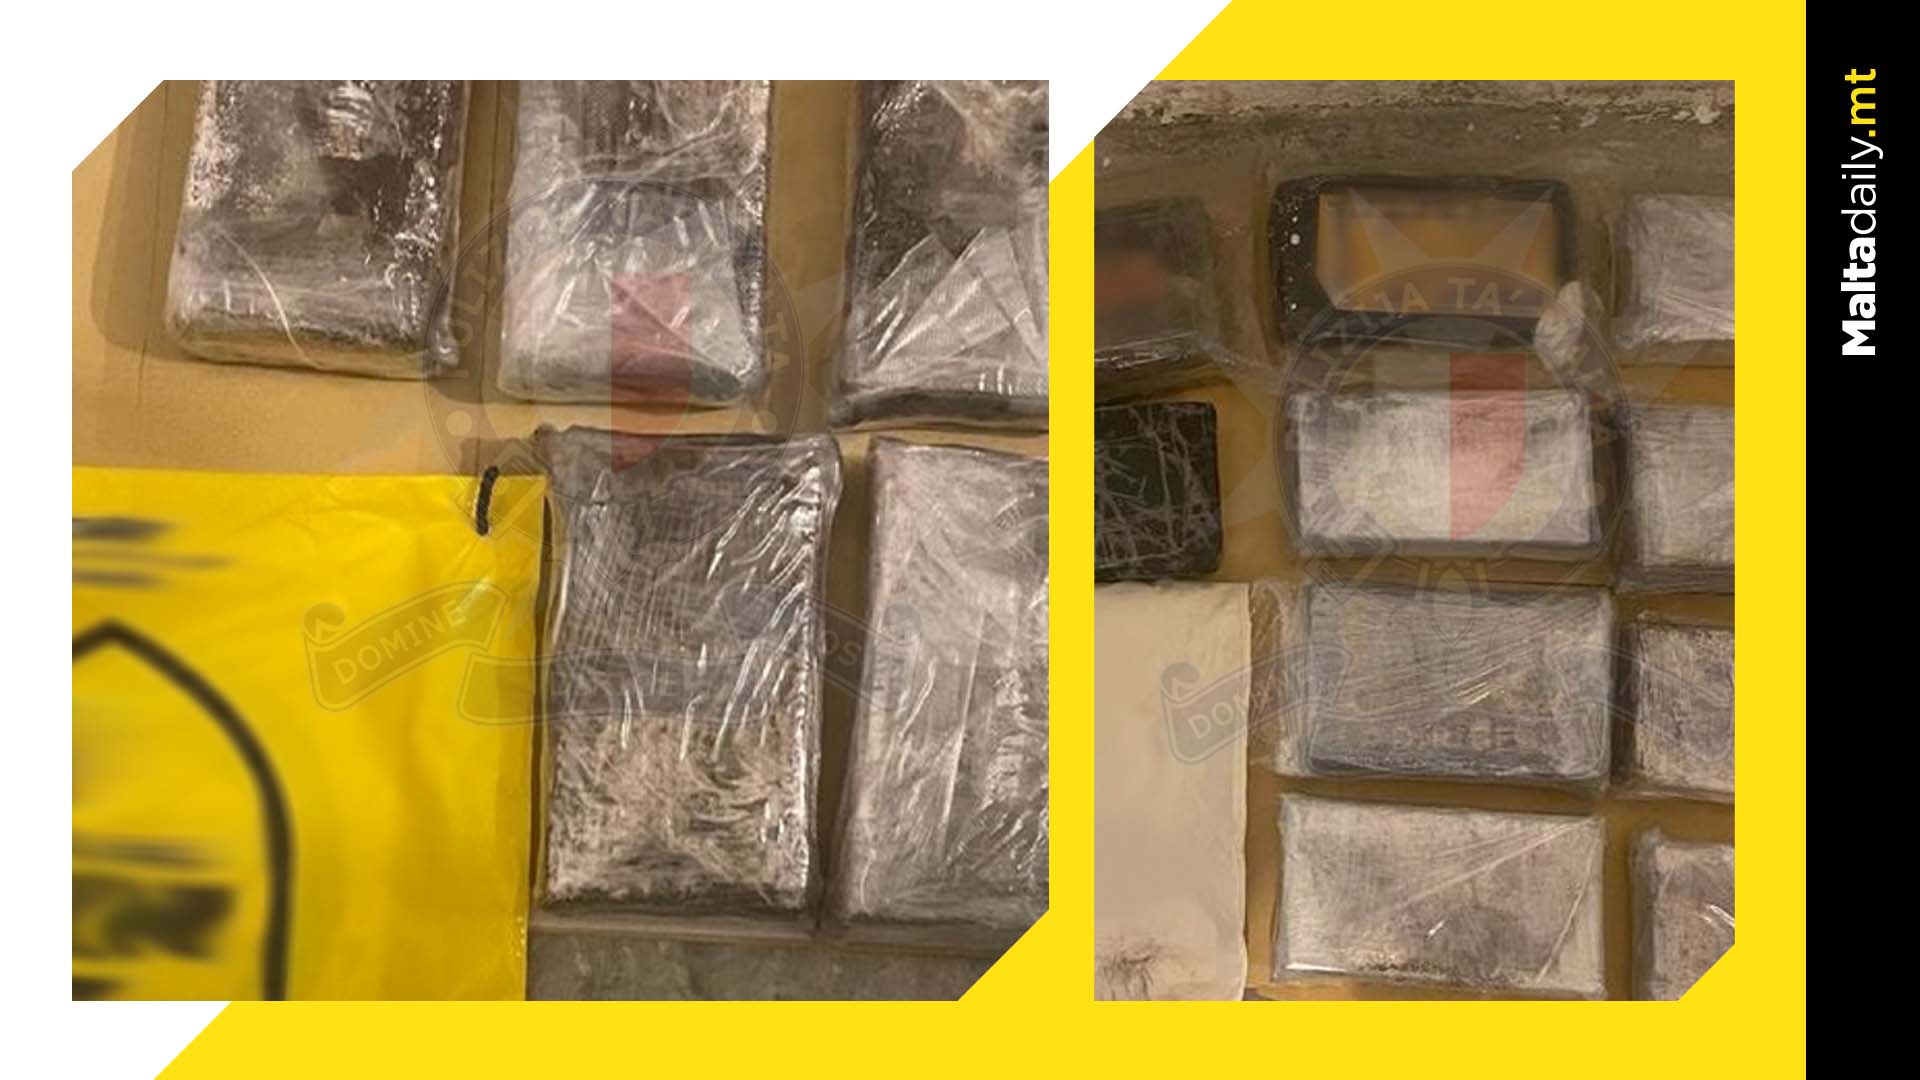 9 Arrested In Connection To Drug Trafficking In Malta